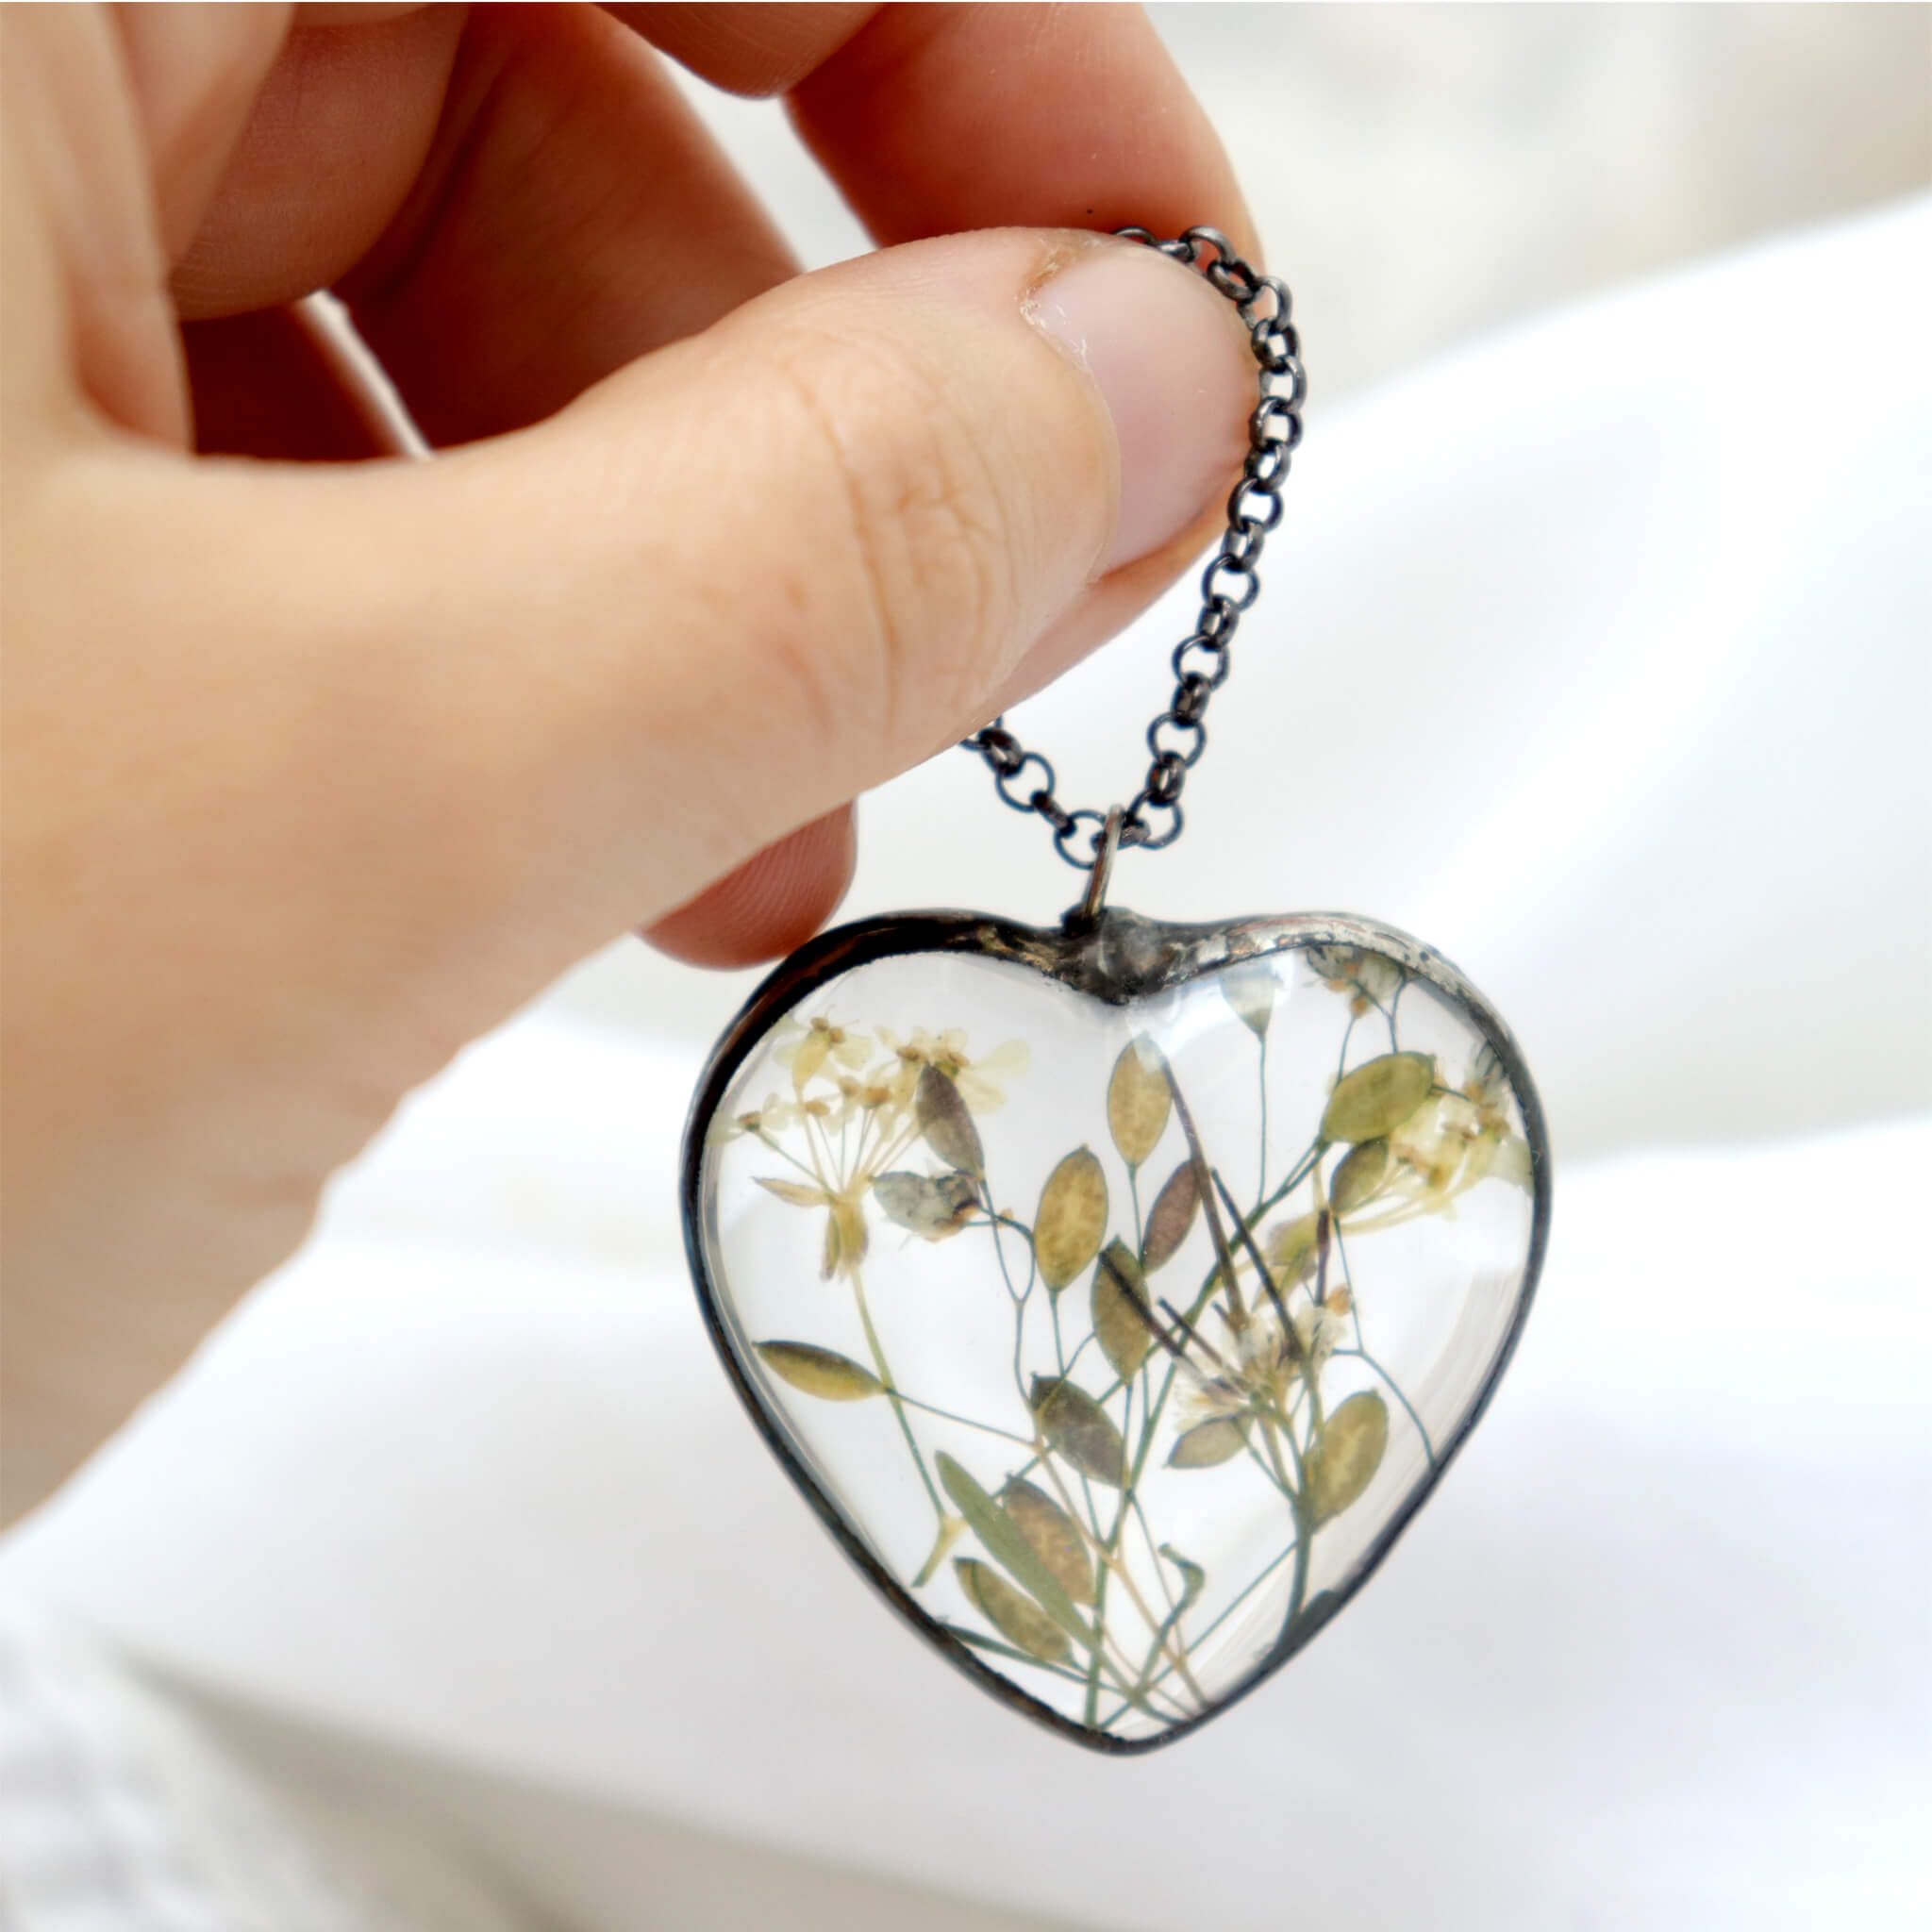 Hand holding heart shaped glass necklace with some plants inside it